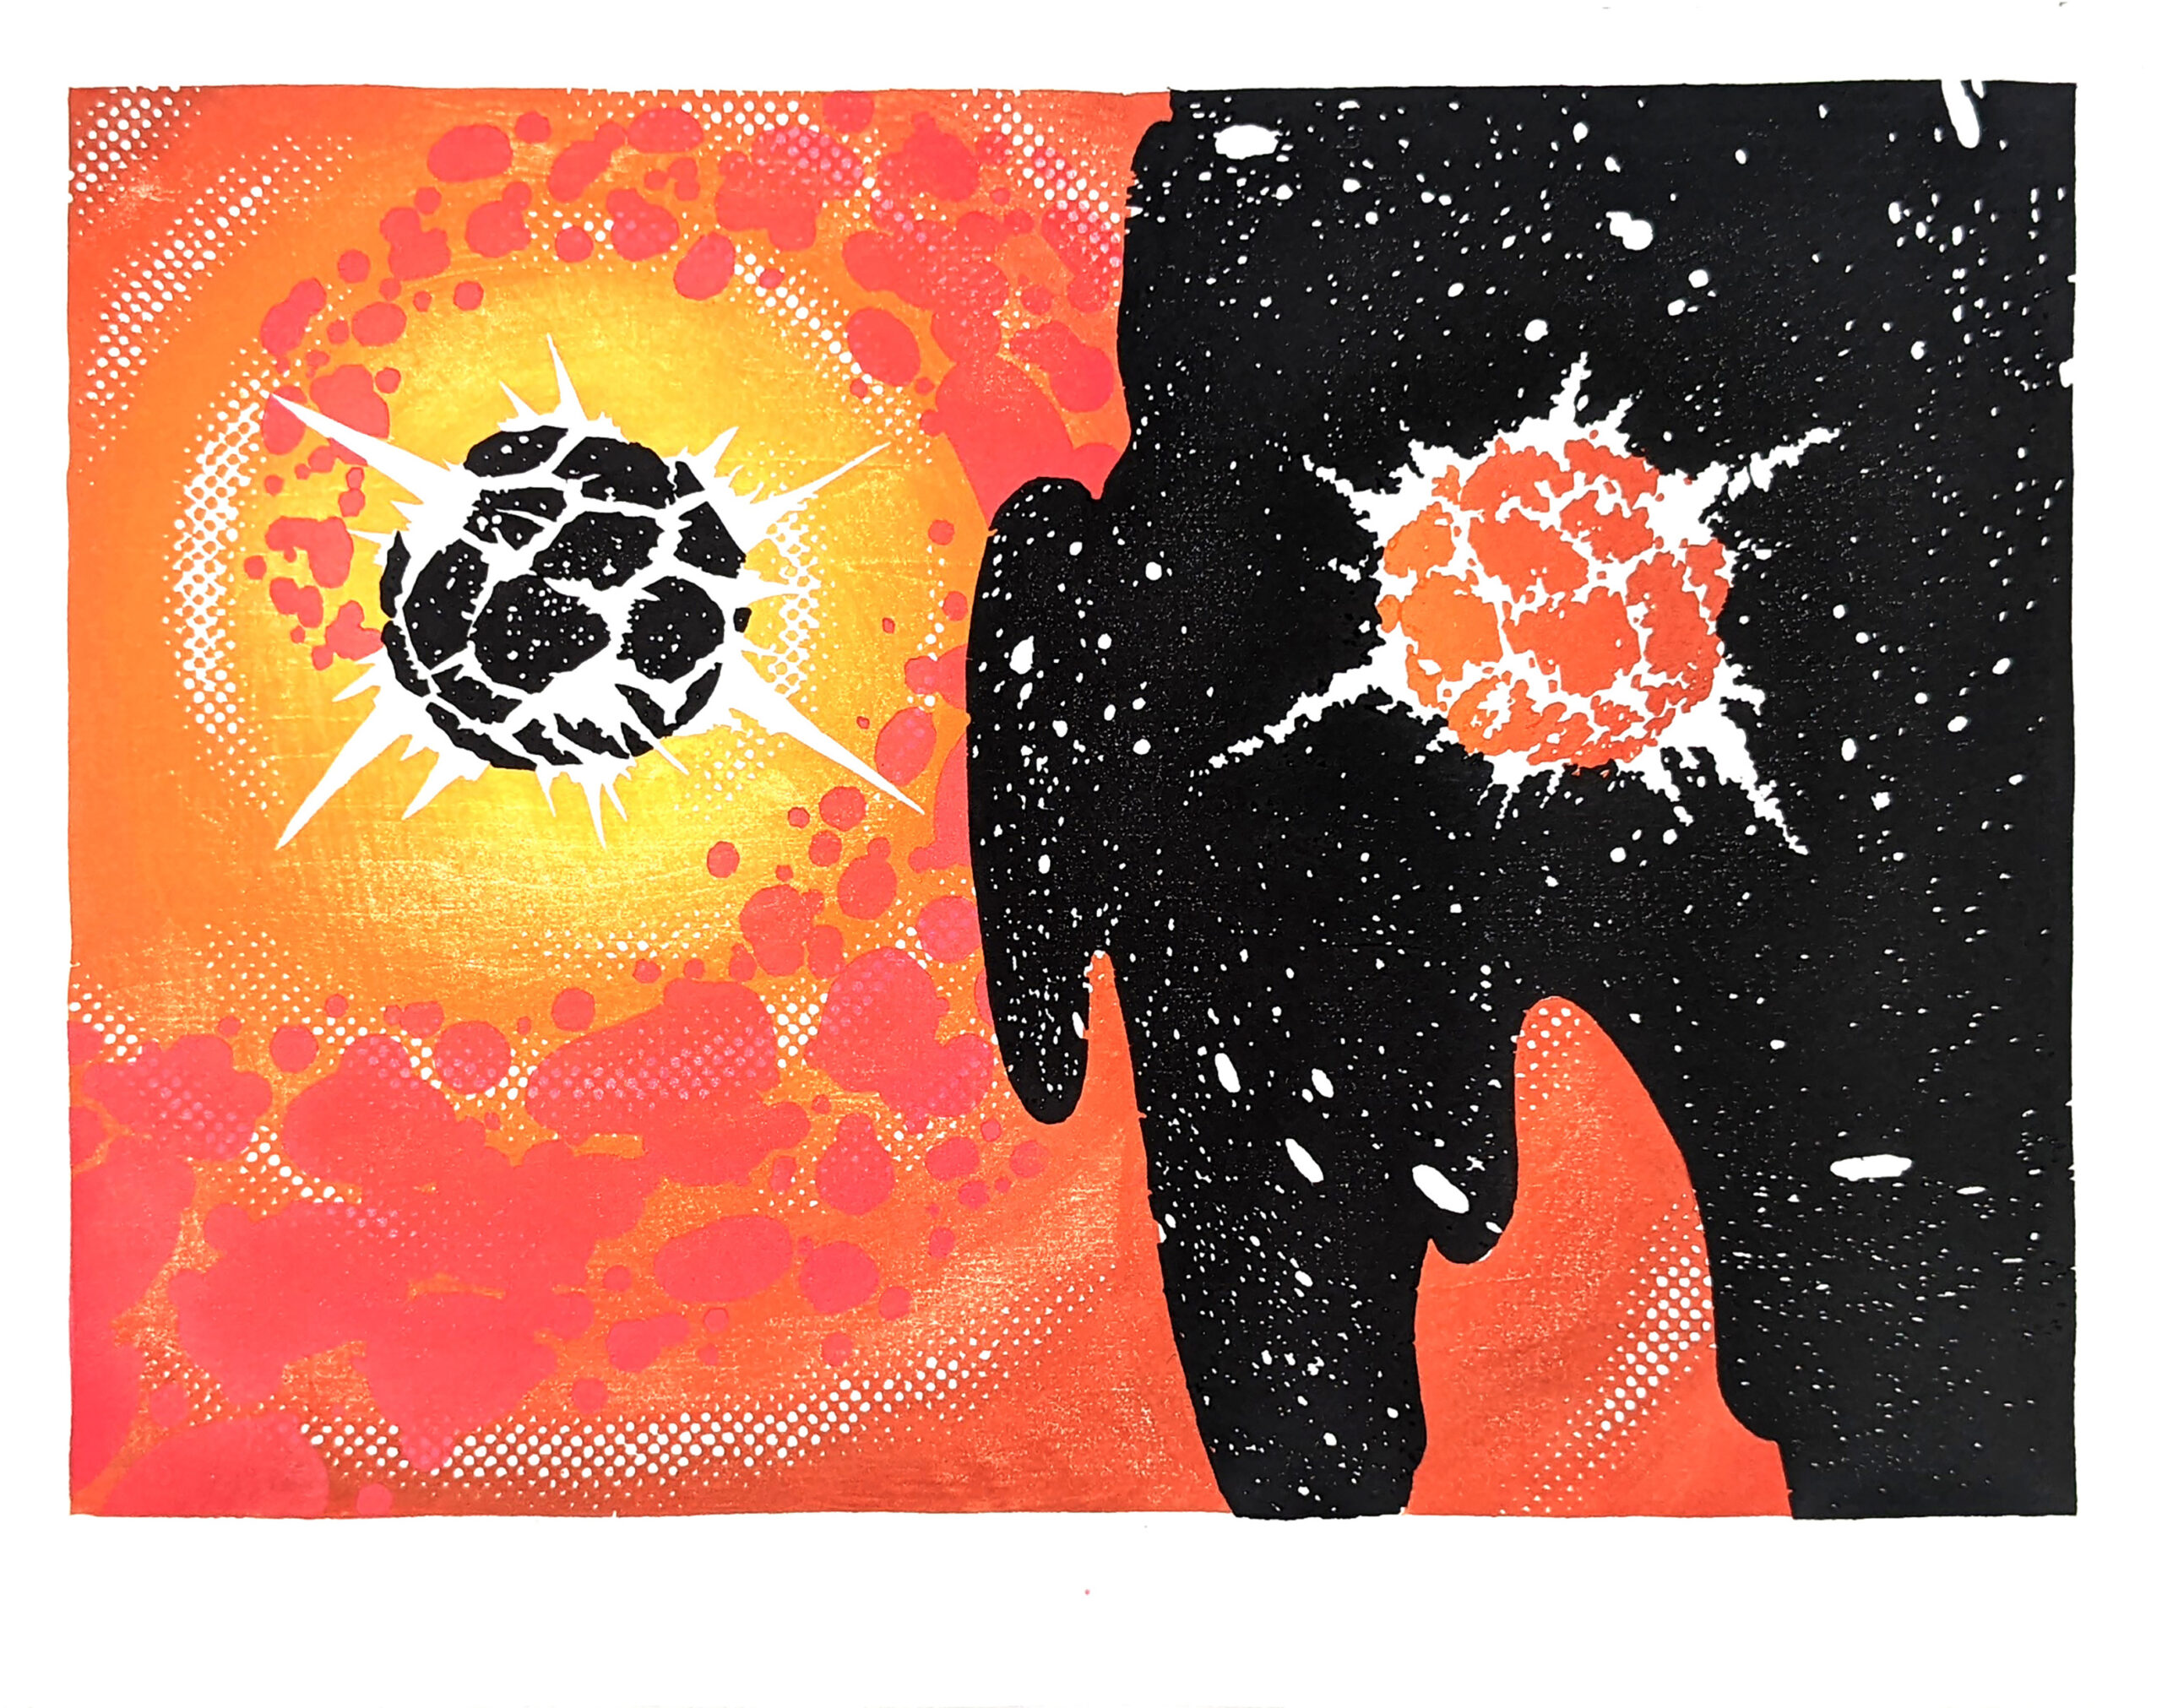 "The Entangled Fates of the Universe" Mokuhanga (water based wood block print). Two exploding celestial bodies roughly split the composition between warm, bright colors and a cool, b&w starscape.